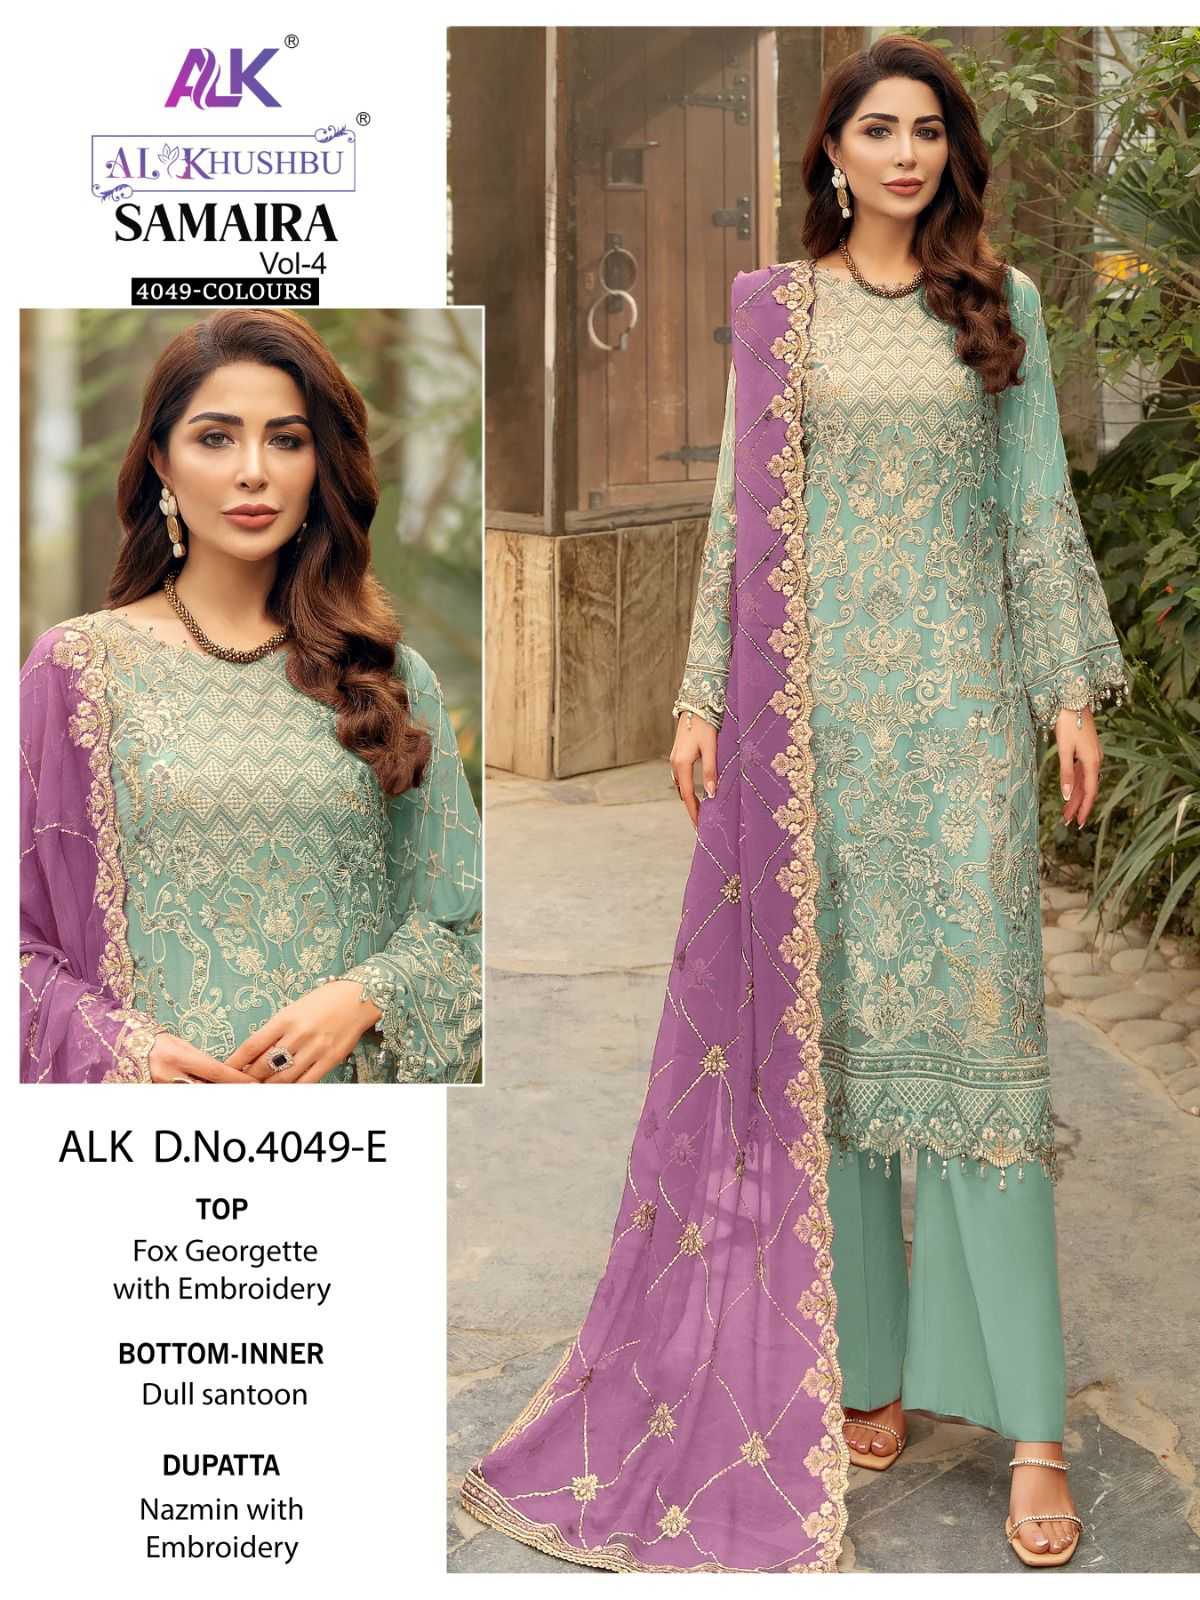 Al Khushbu Samaira Vol 4 4049 Colours Georgette with Embroidery Latest  Pakistani suits Collection